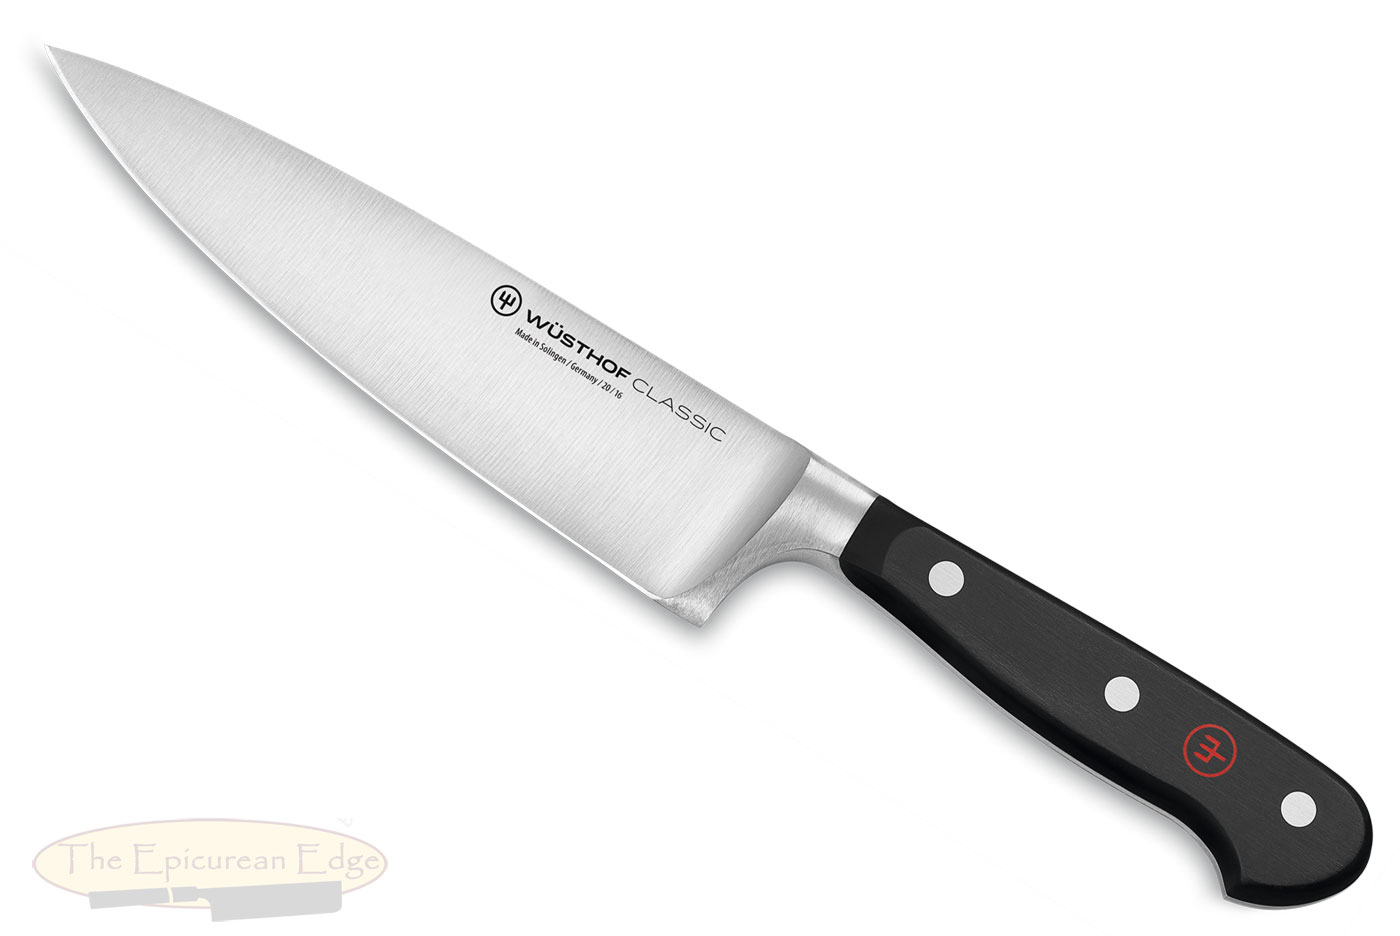 Wusthof-Trident Classic Chef's Knife - 6 in. (1040100116)